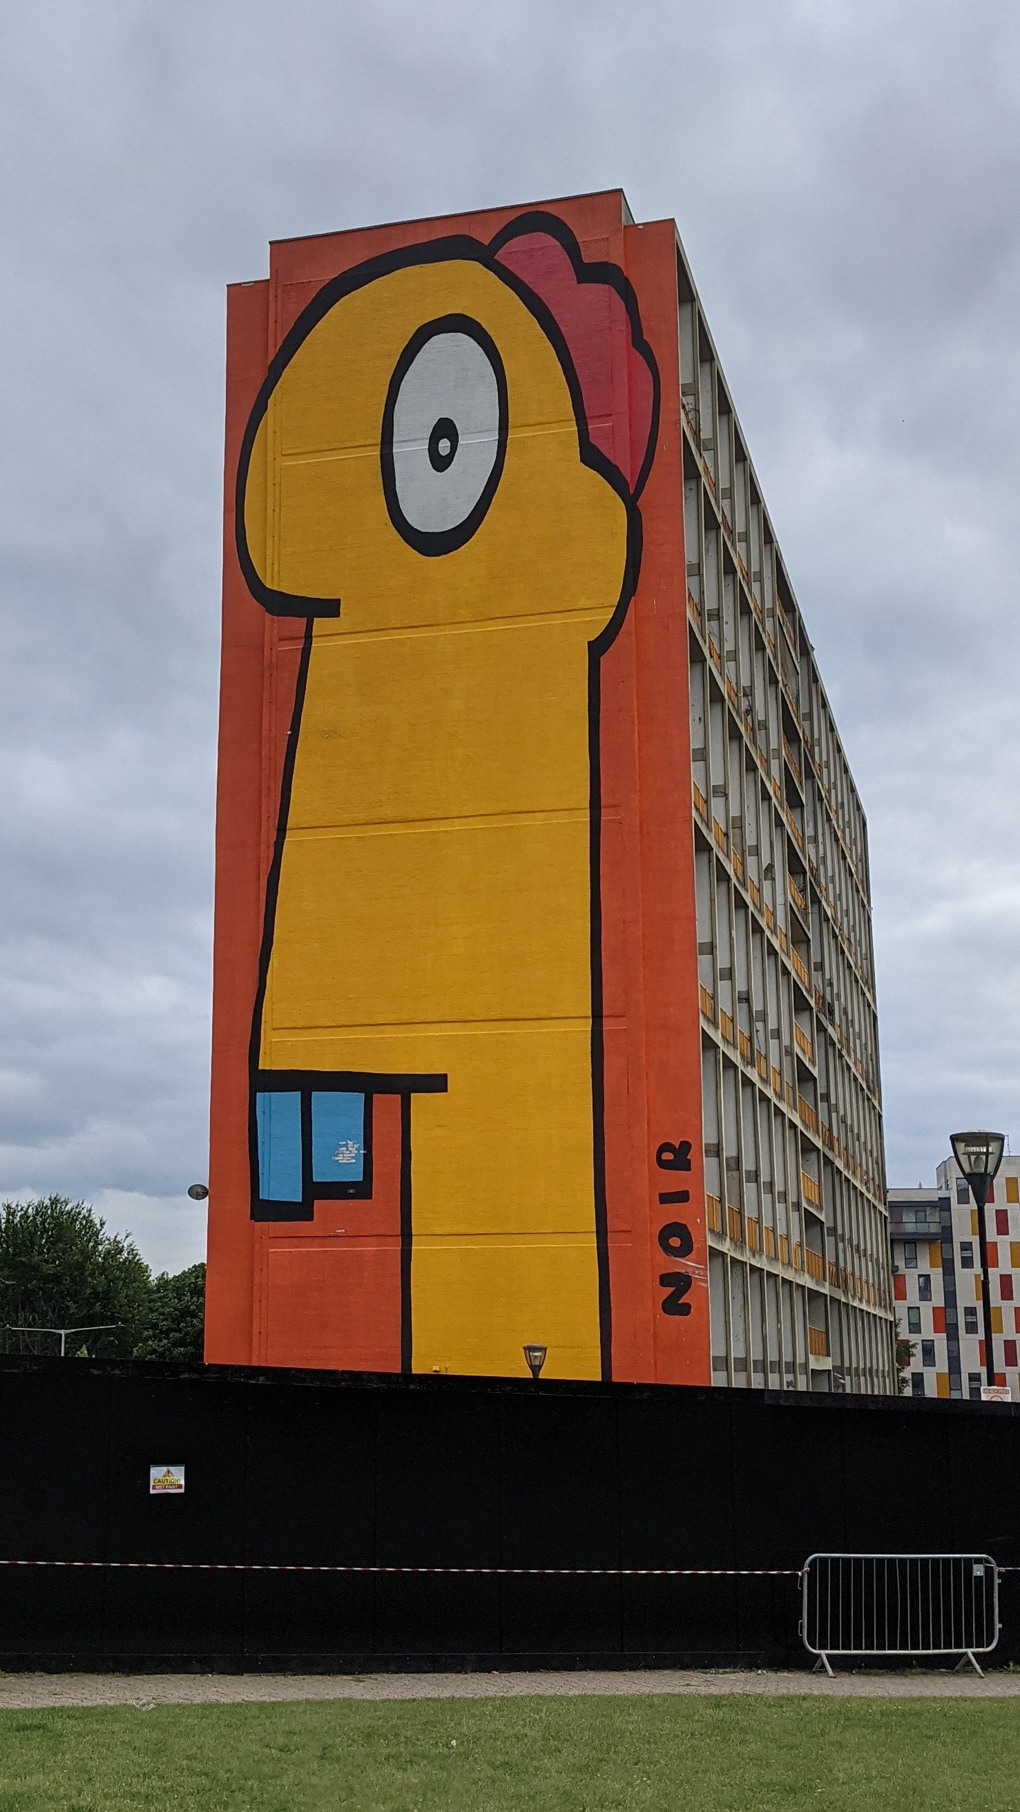 An enormous cartoon character with large teeth painted on the side of a block of flats.